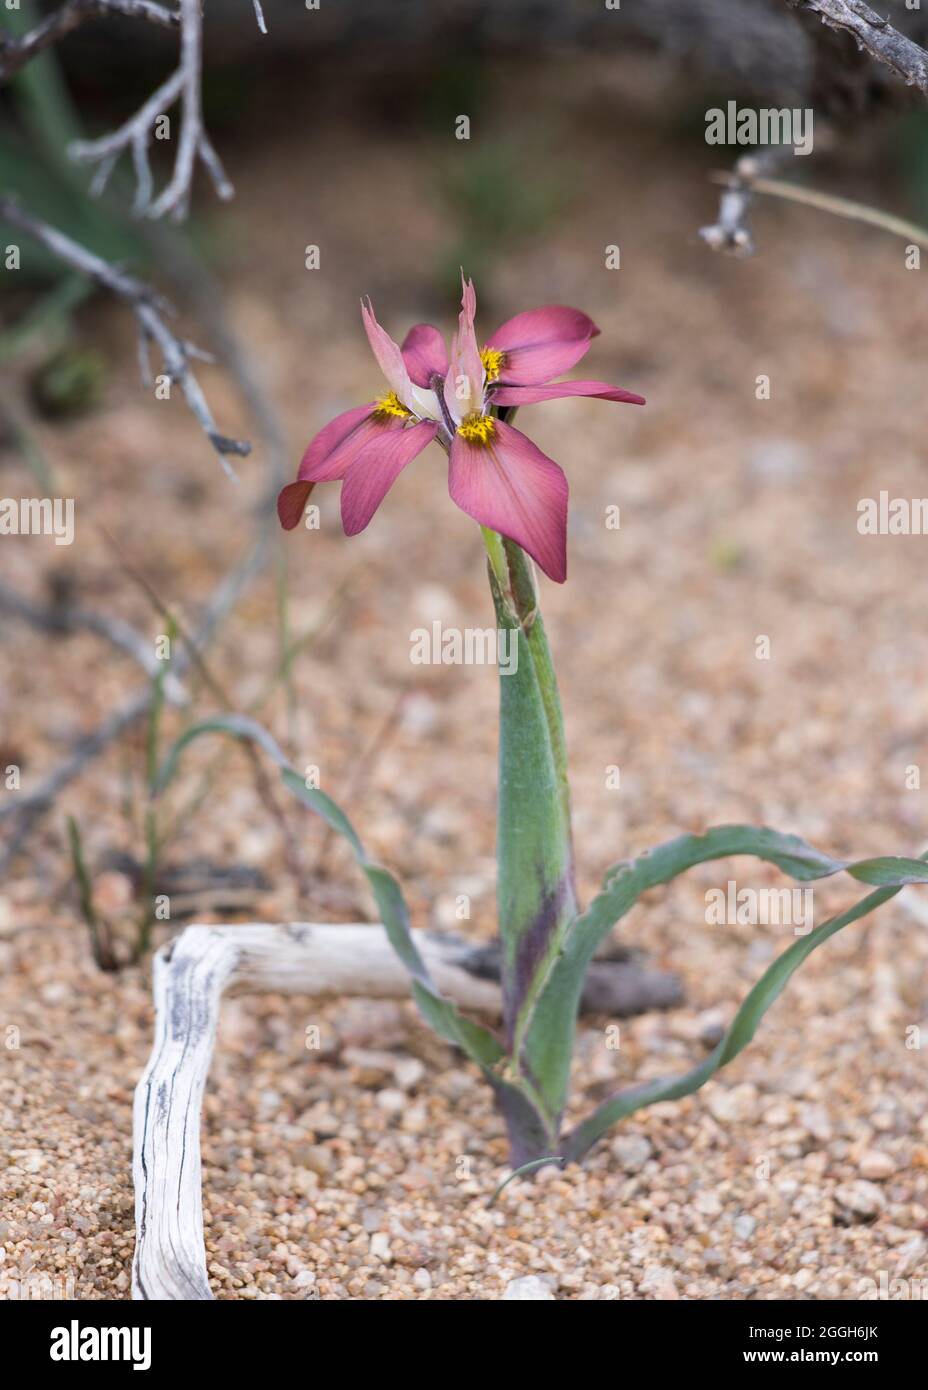 A flower from the Iris family (Moraea ciliata ssp. cuprina) beautiful bulb plant with a light maroon brown flower Stock Photo